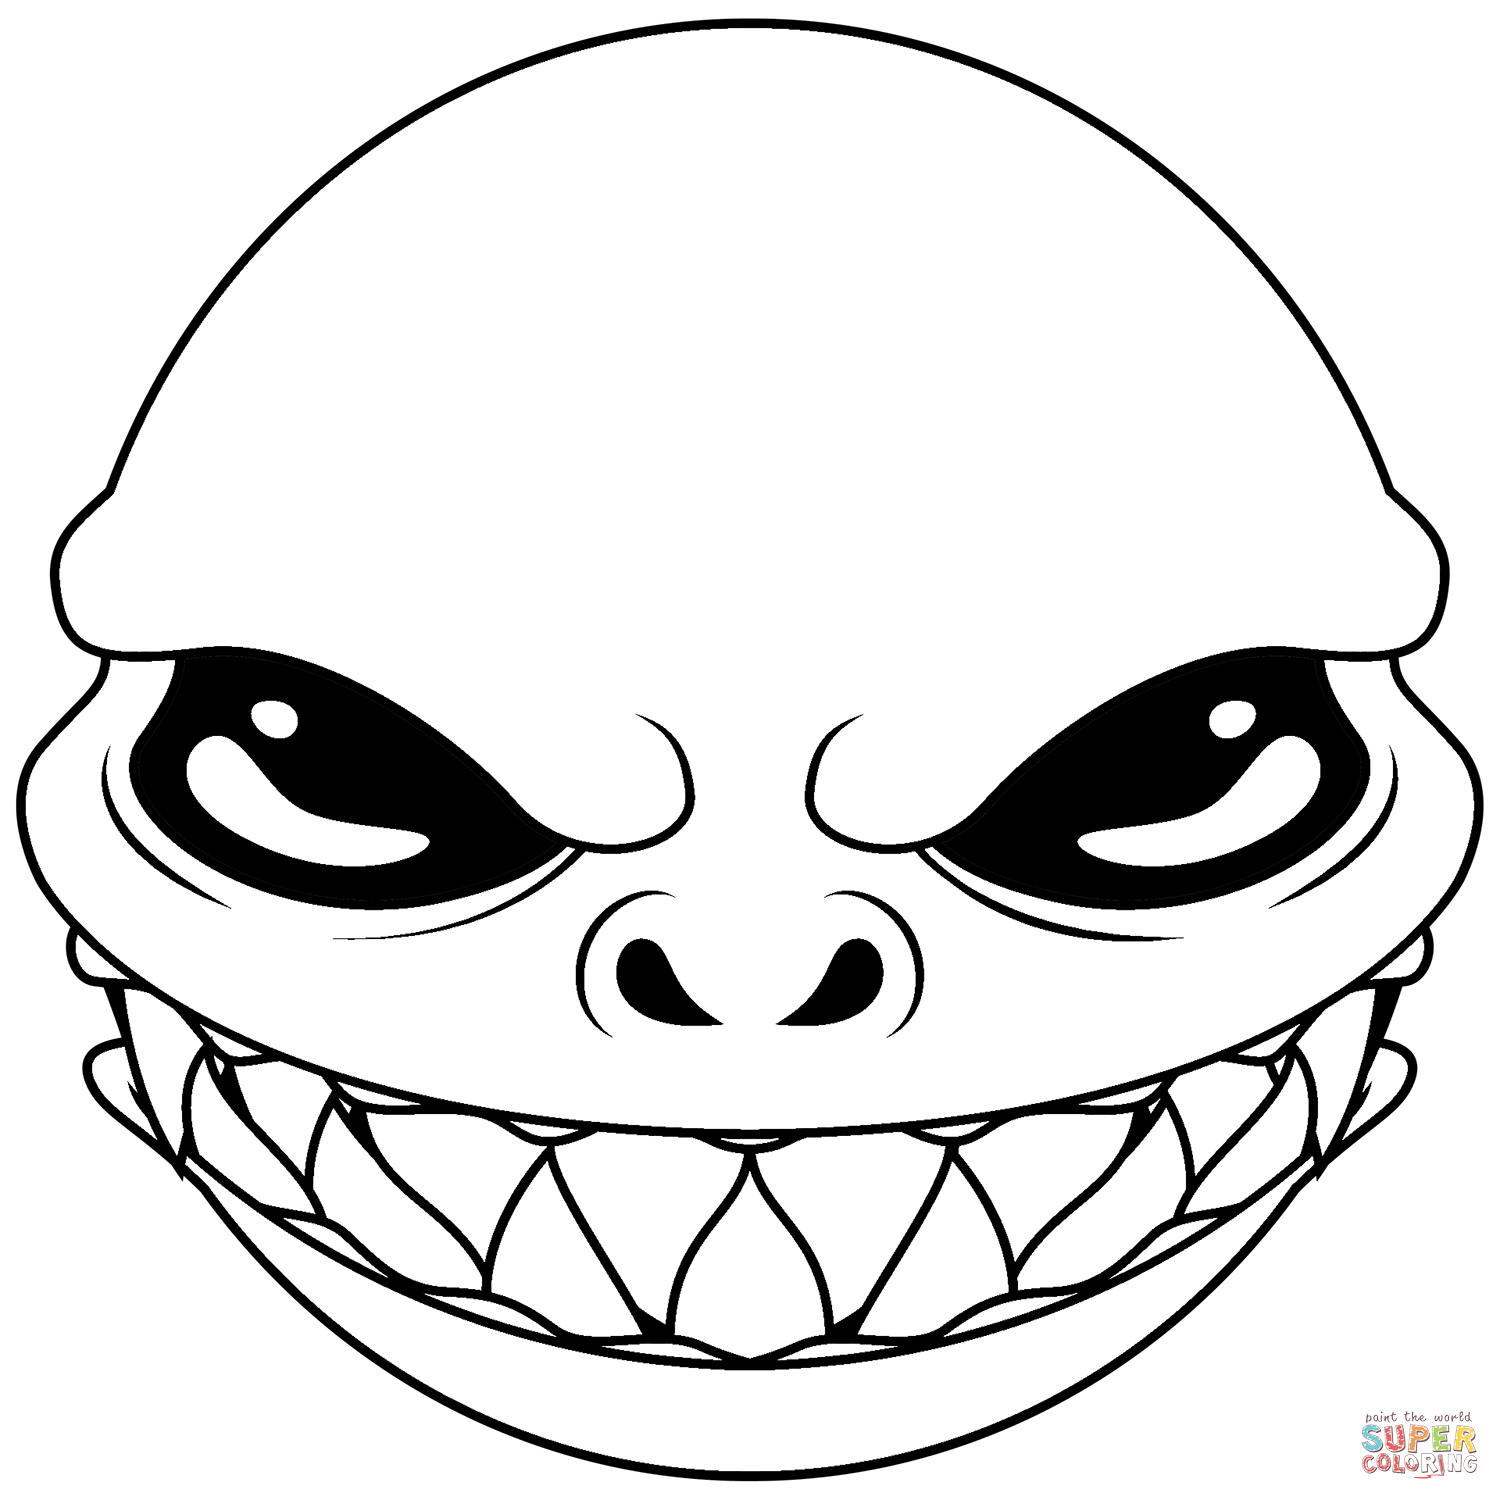 Creepy smiley coloring page free printable coloring pages